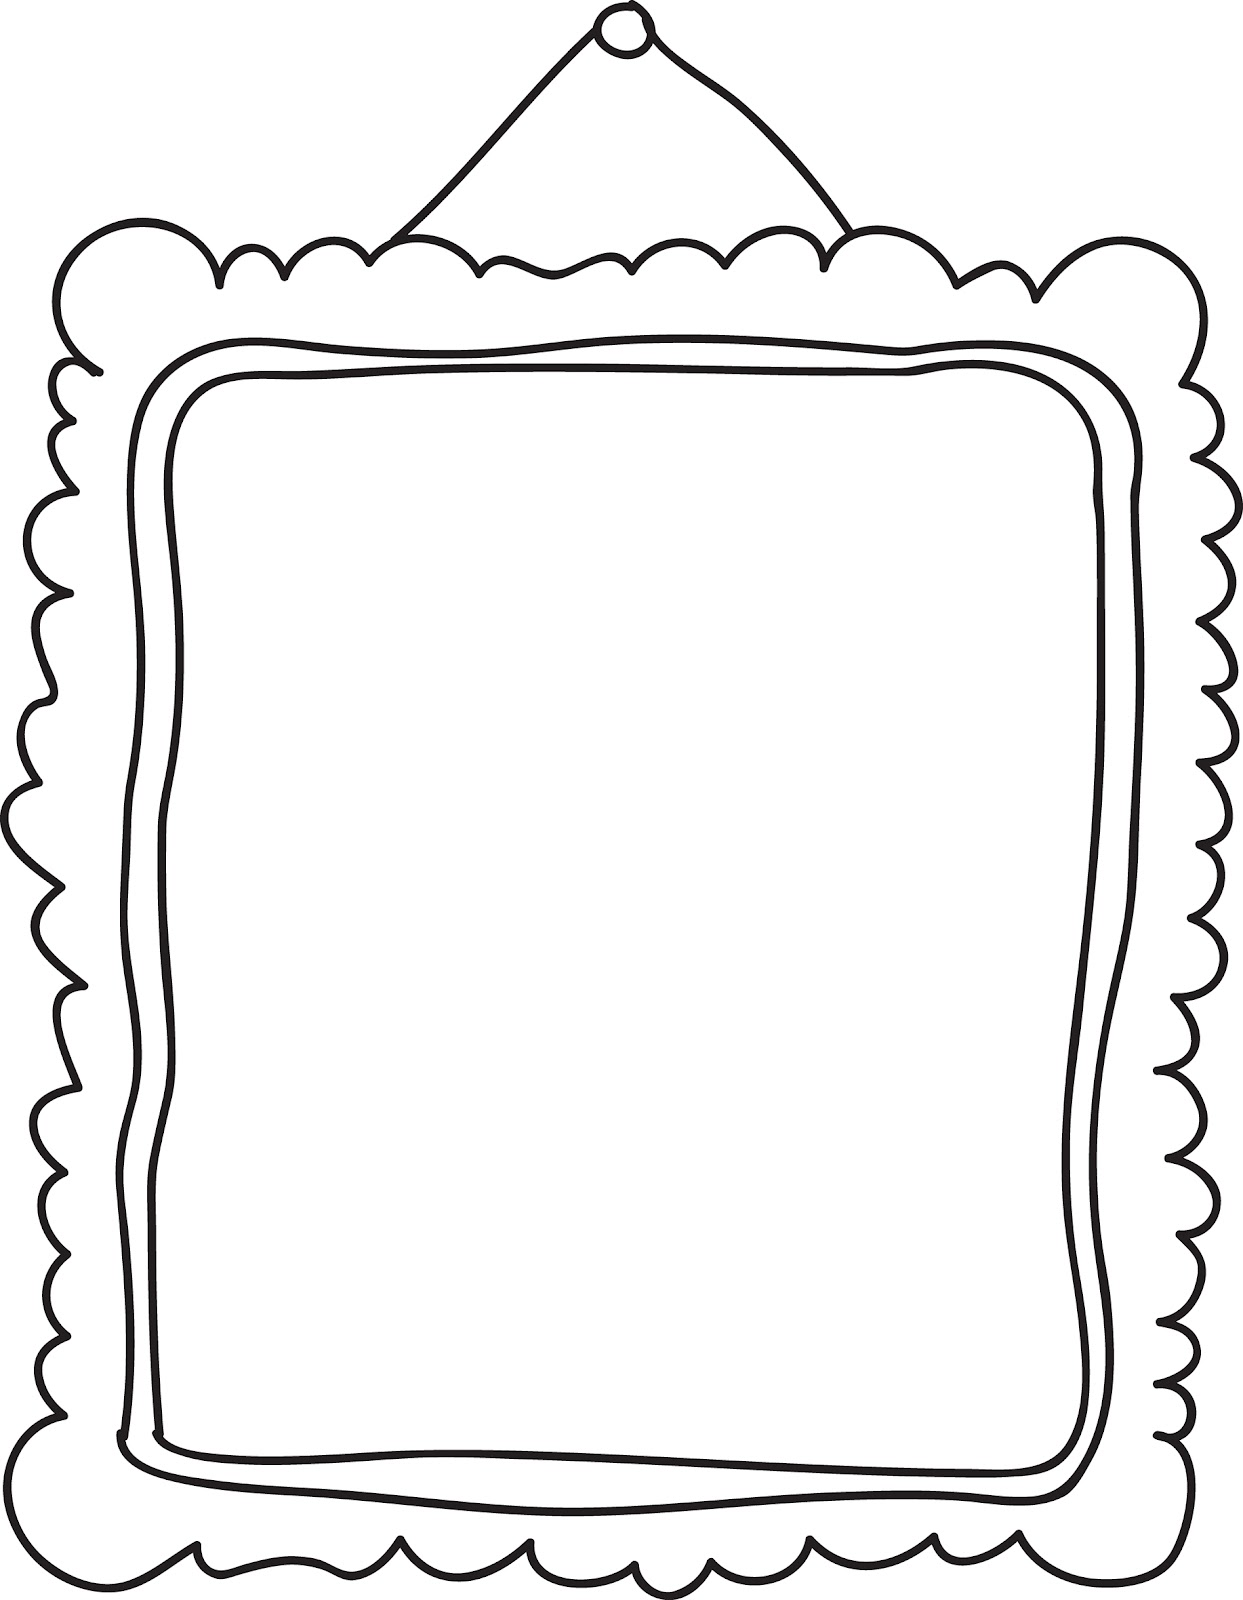 Frame clip art free clipart images 2